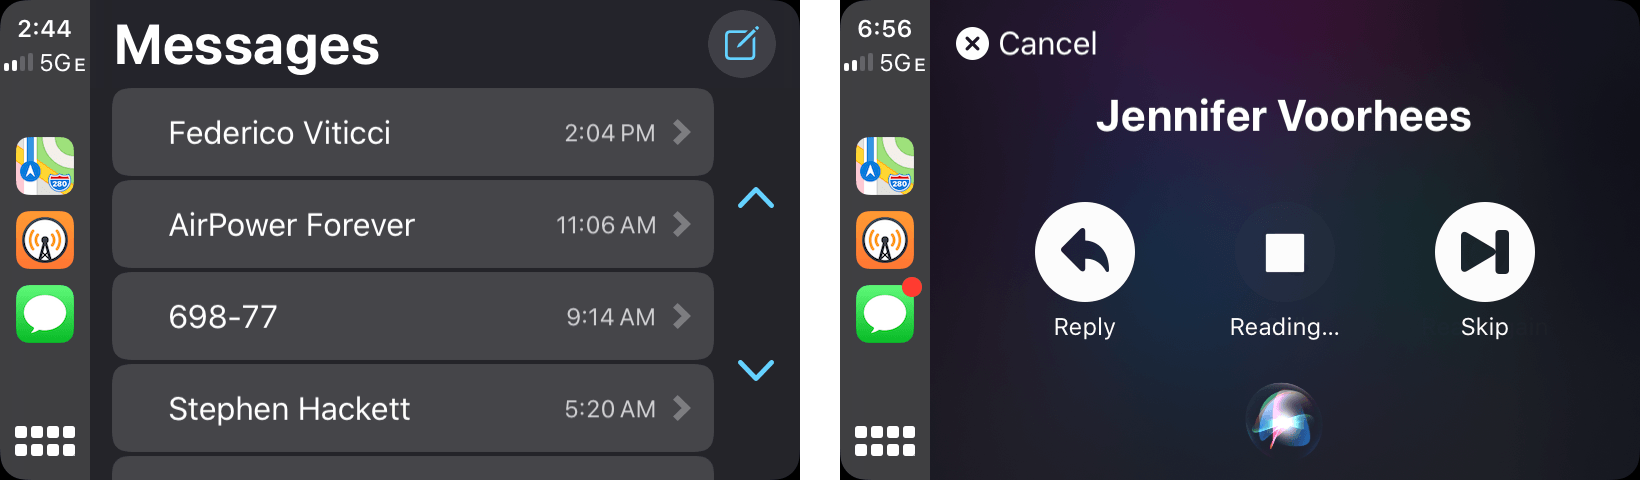 Messages no longer takes you into a Siri UI (left) and adds a new UI for interacting with messages (right).